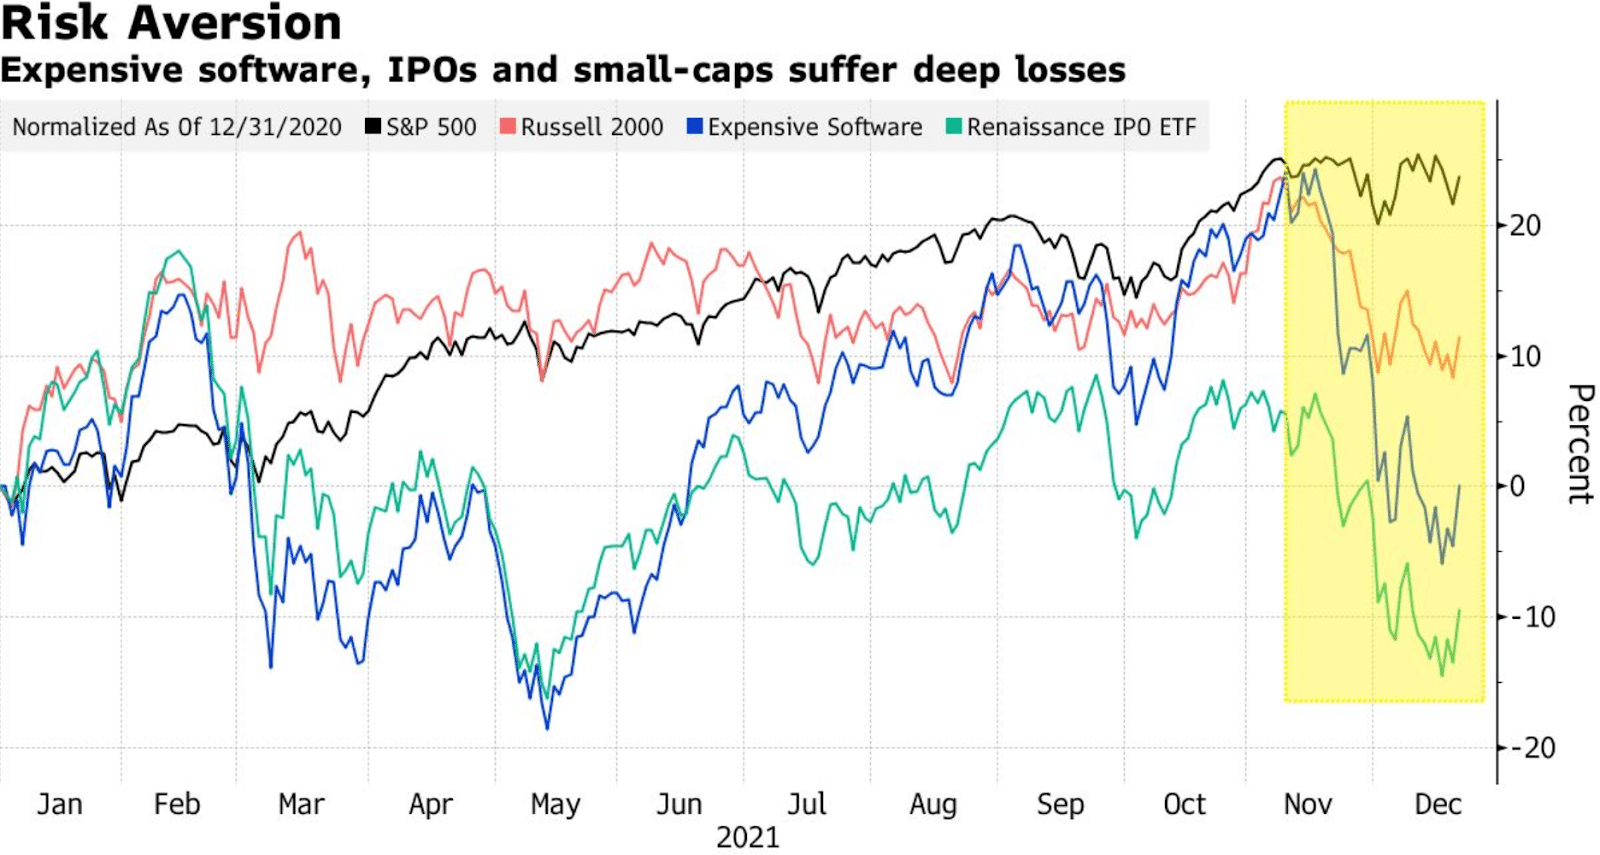 Expensive software, IPOs and small-caps suffer big losses